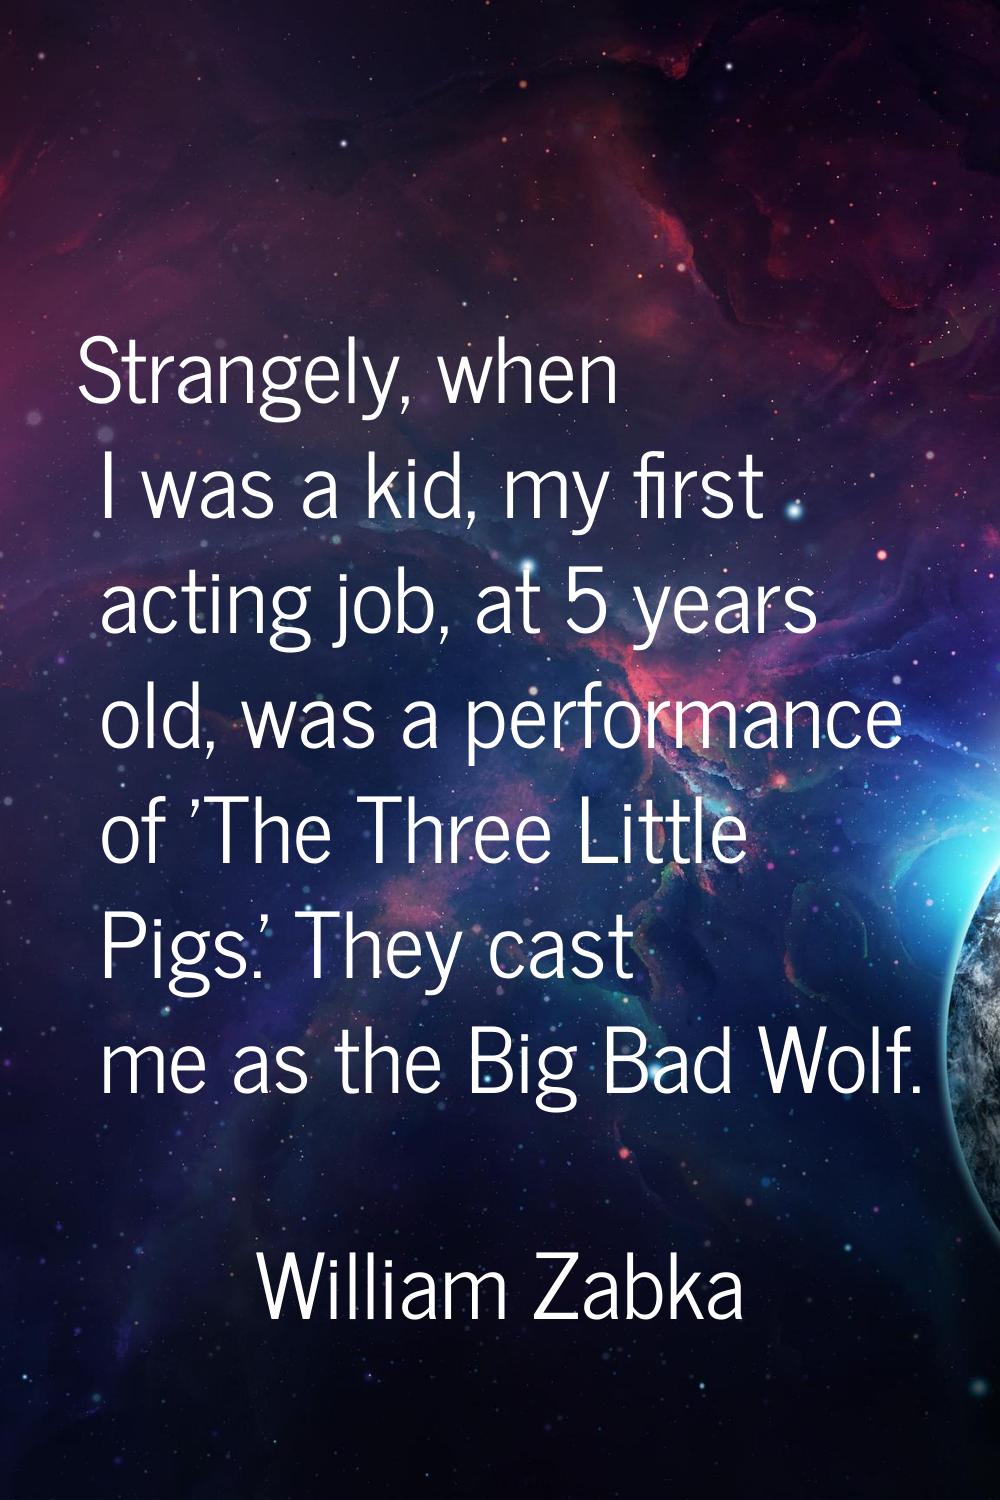 Strangely, when I was a kid, my first acting job, at 5 years old, was a performance of 'The Three L